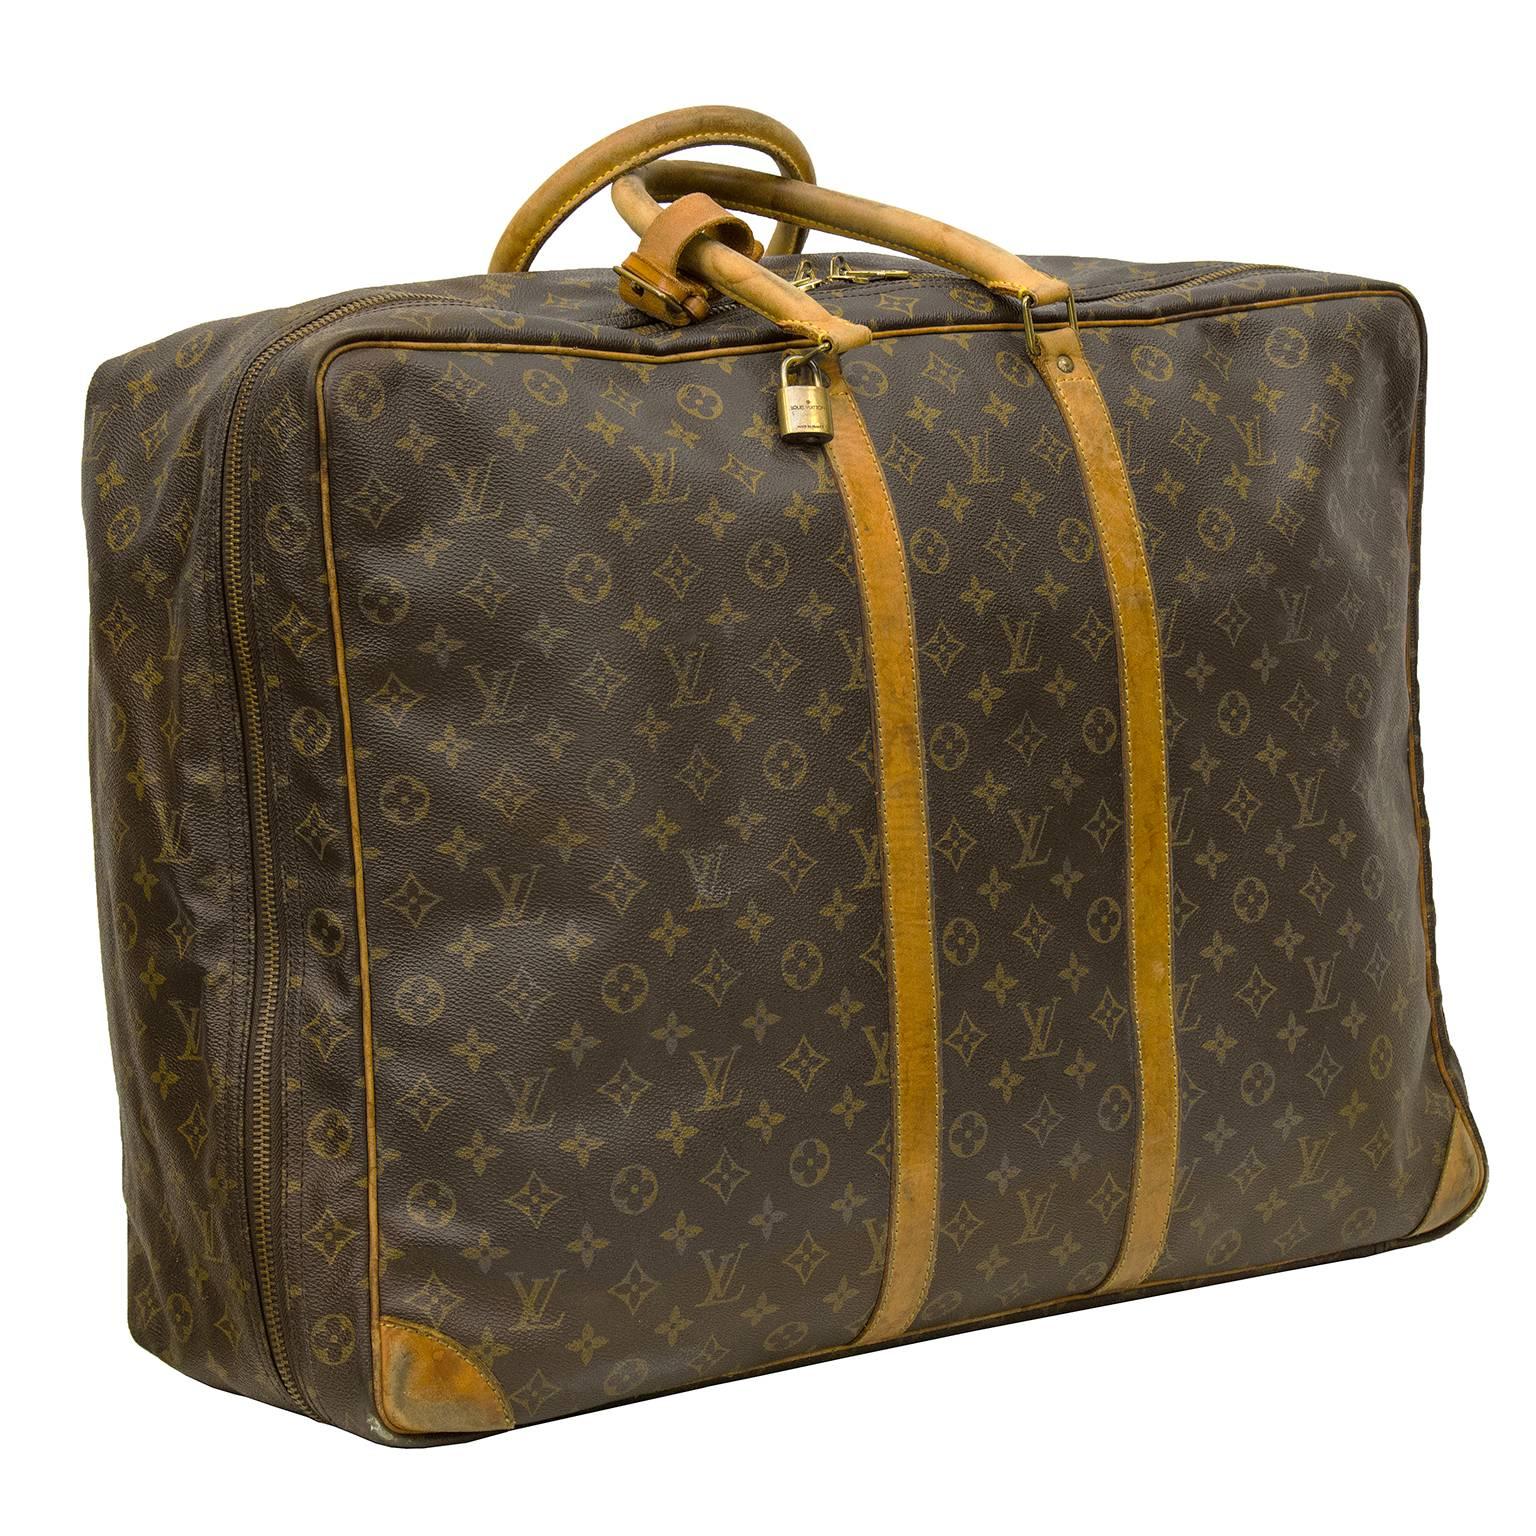 Travel in style with this ultra chic Louis Vuitton Sirius 60 suitcase; large enough to hold all the essentials on a long trip. This Louis Vuitton Monogram Canvas Sirius 60 single compartment soft suitcase is the second largest member of the Sirius